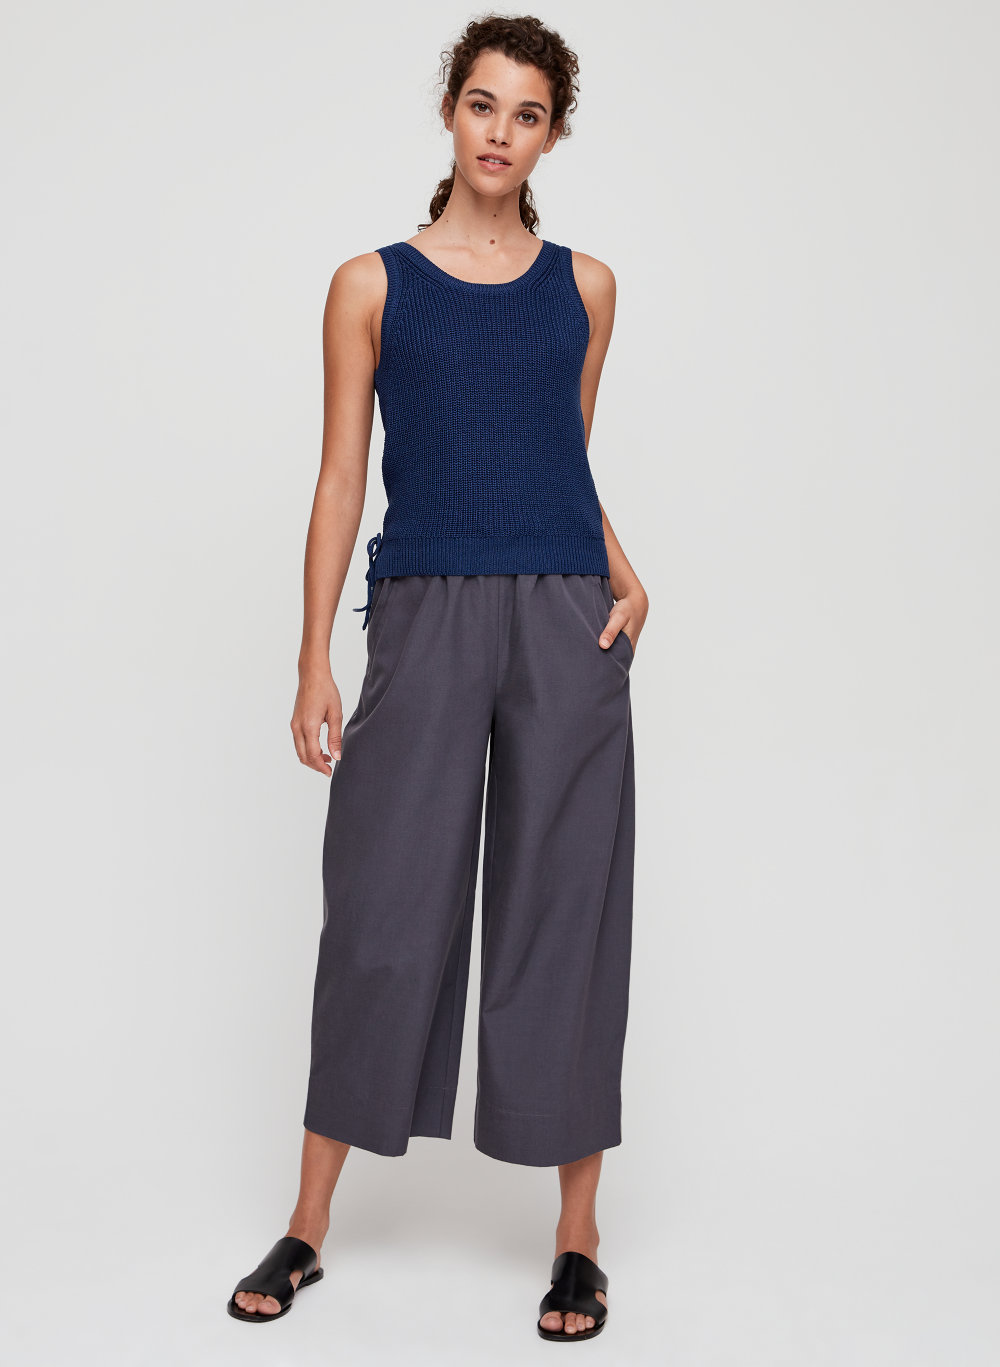 The Group by Babaton STACEY KNIT TOP | Aritzia US